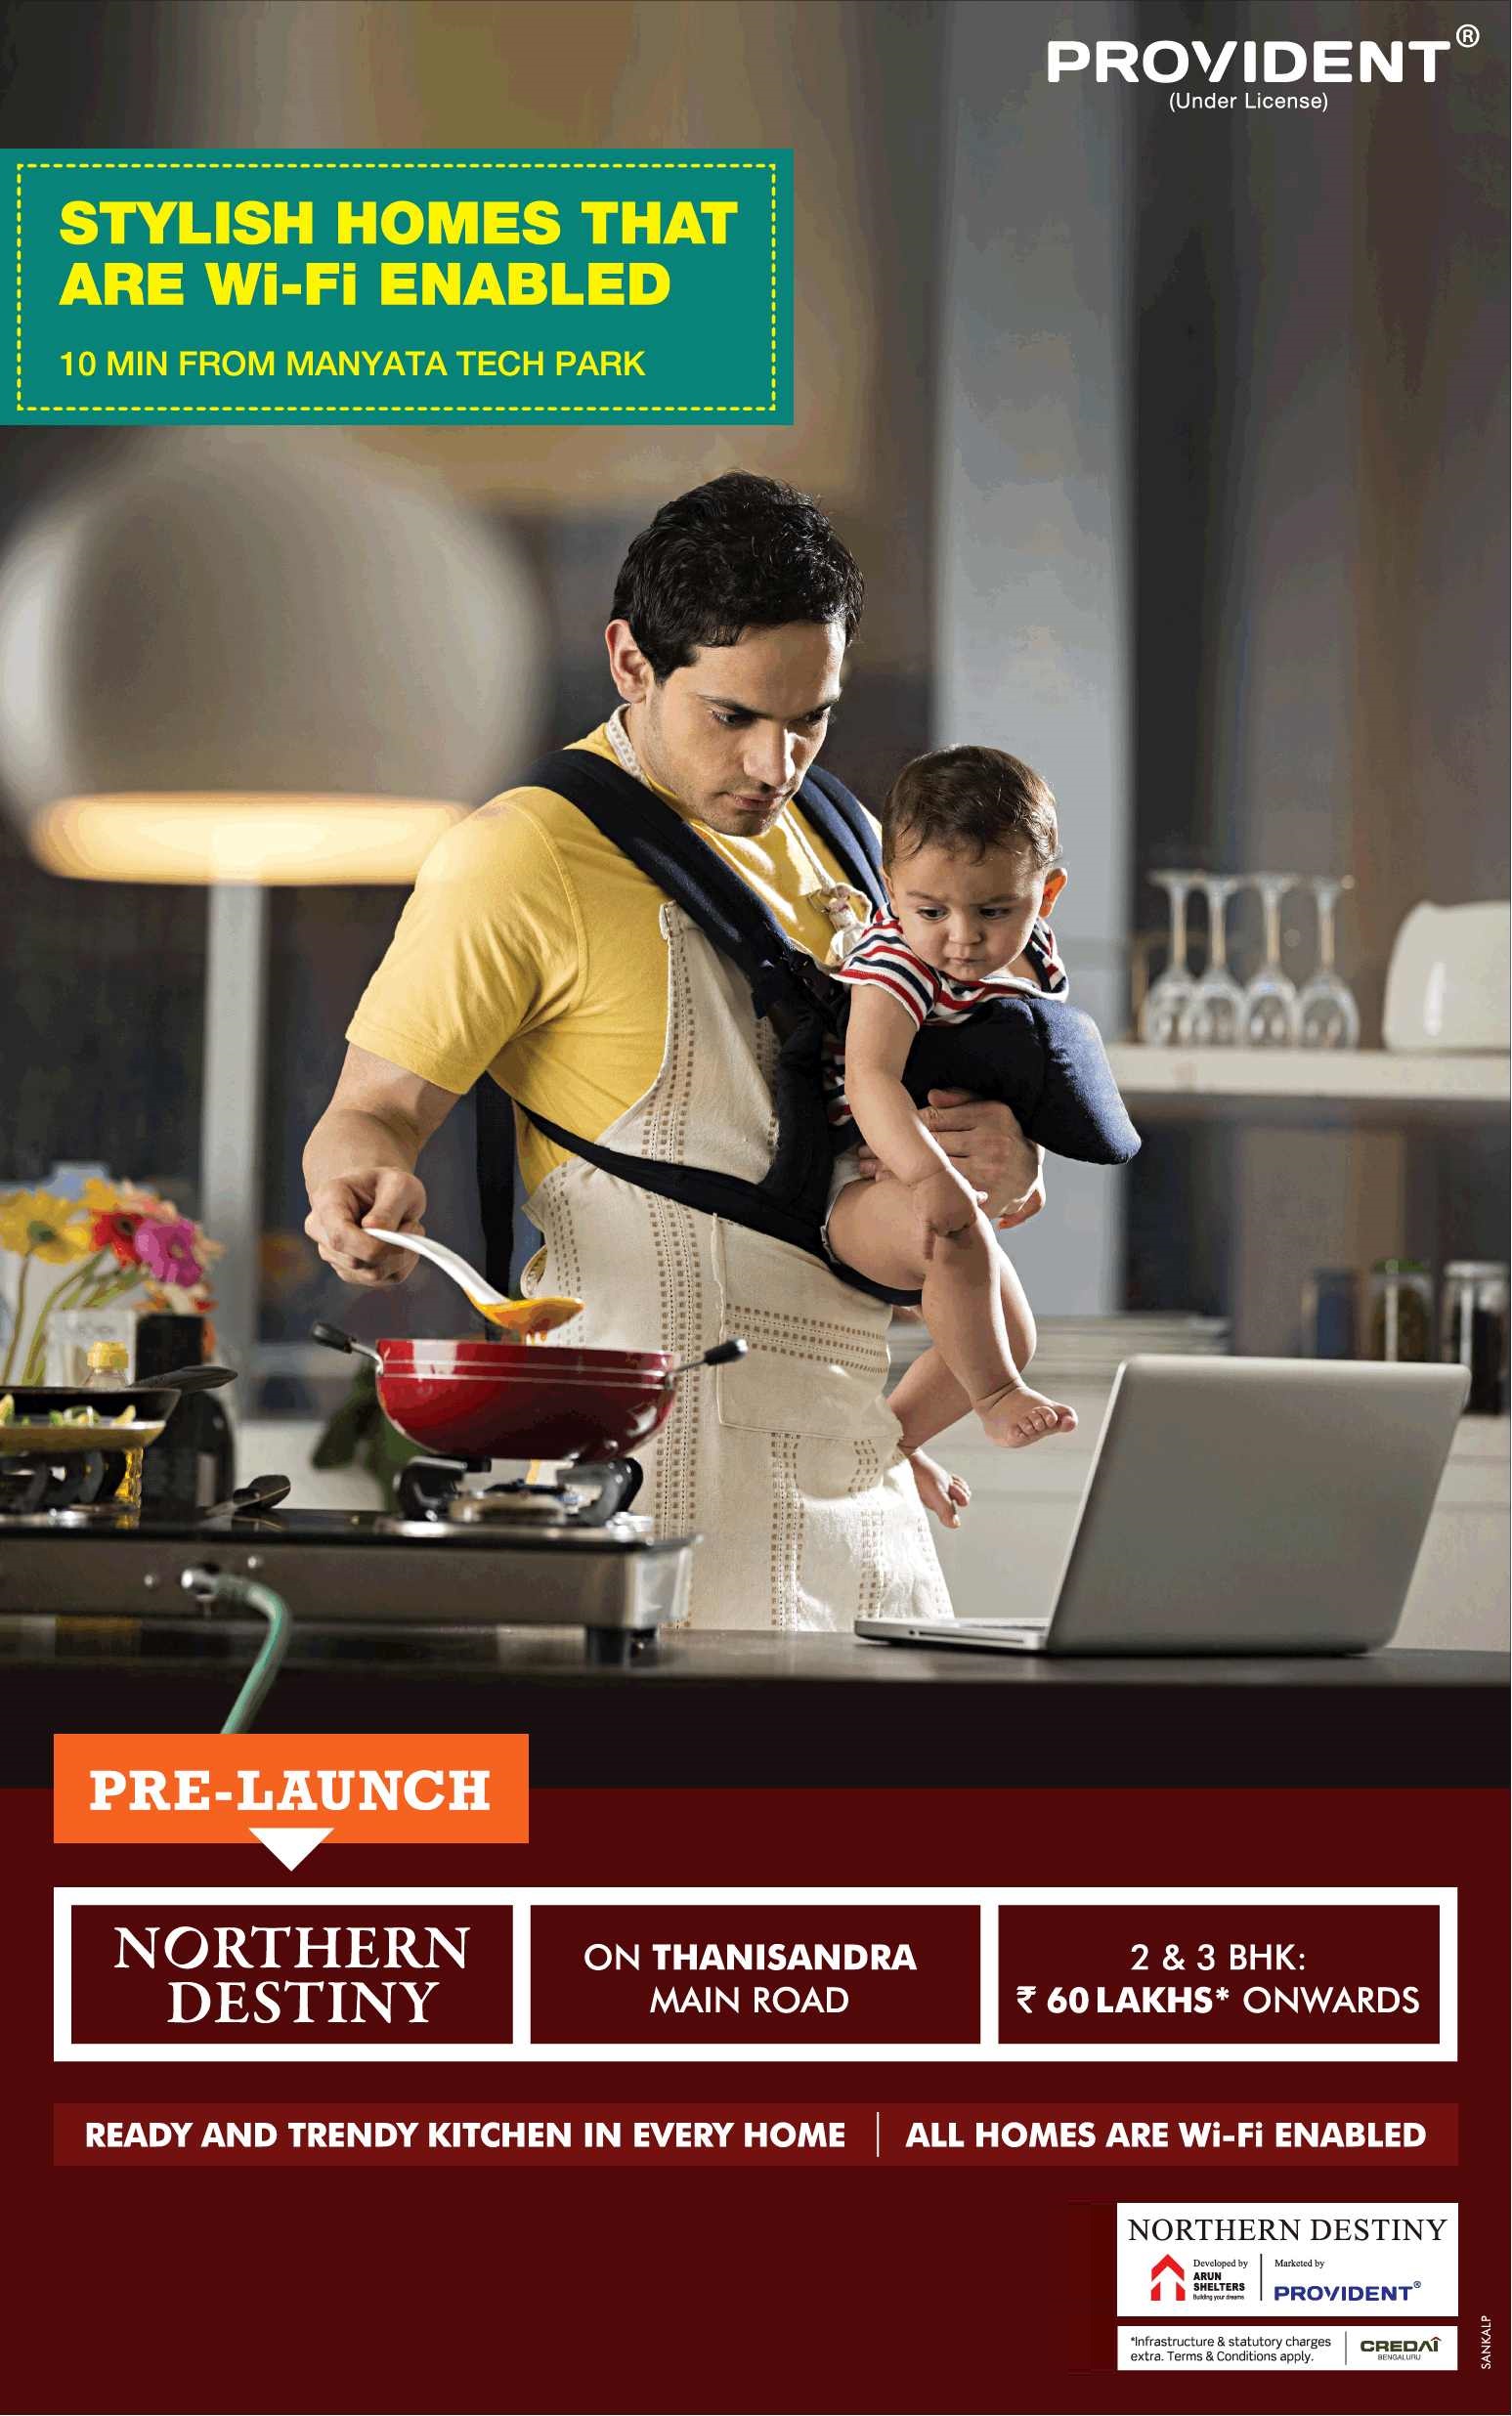 Book 2 & 3 bhk affordable luxury home at Rs.60 lakhs at Provident Northern Destiny in Bangalore